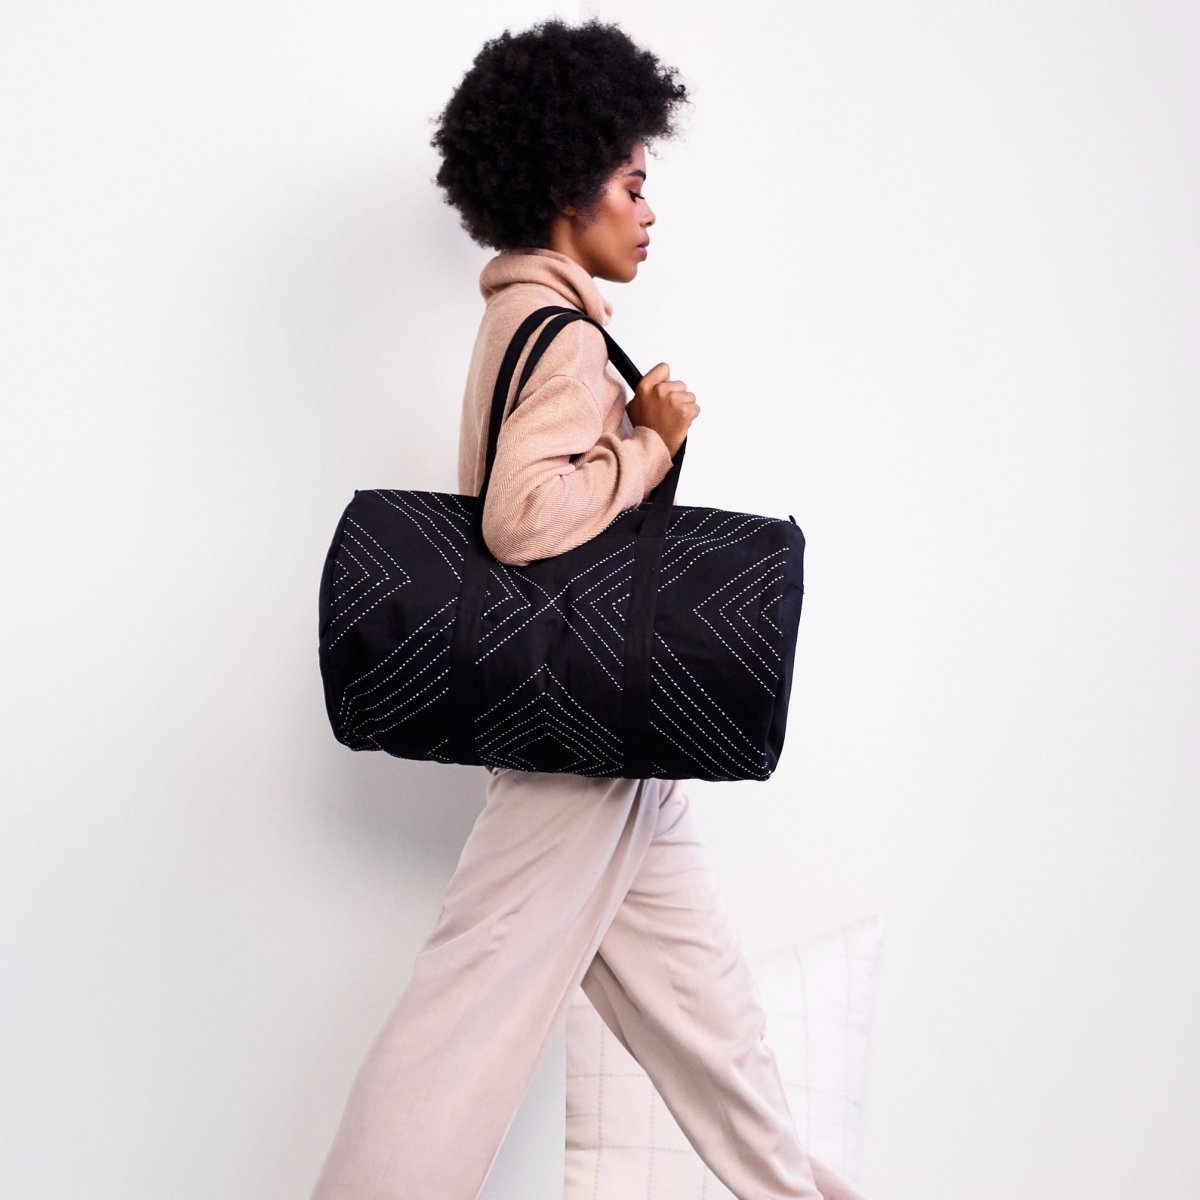 Model carries black duffel bag with white stitched geometric design. Designed by Anchal in Louisville, Kentucky and made in Ajmer, India.